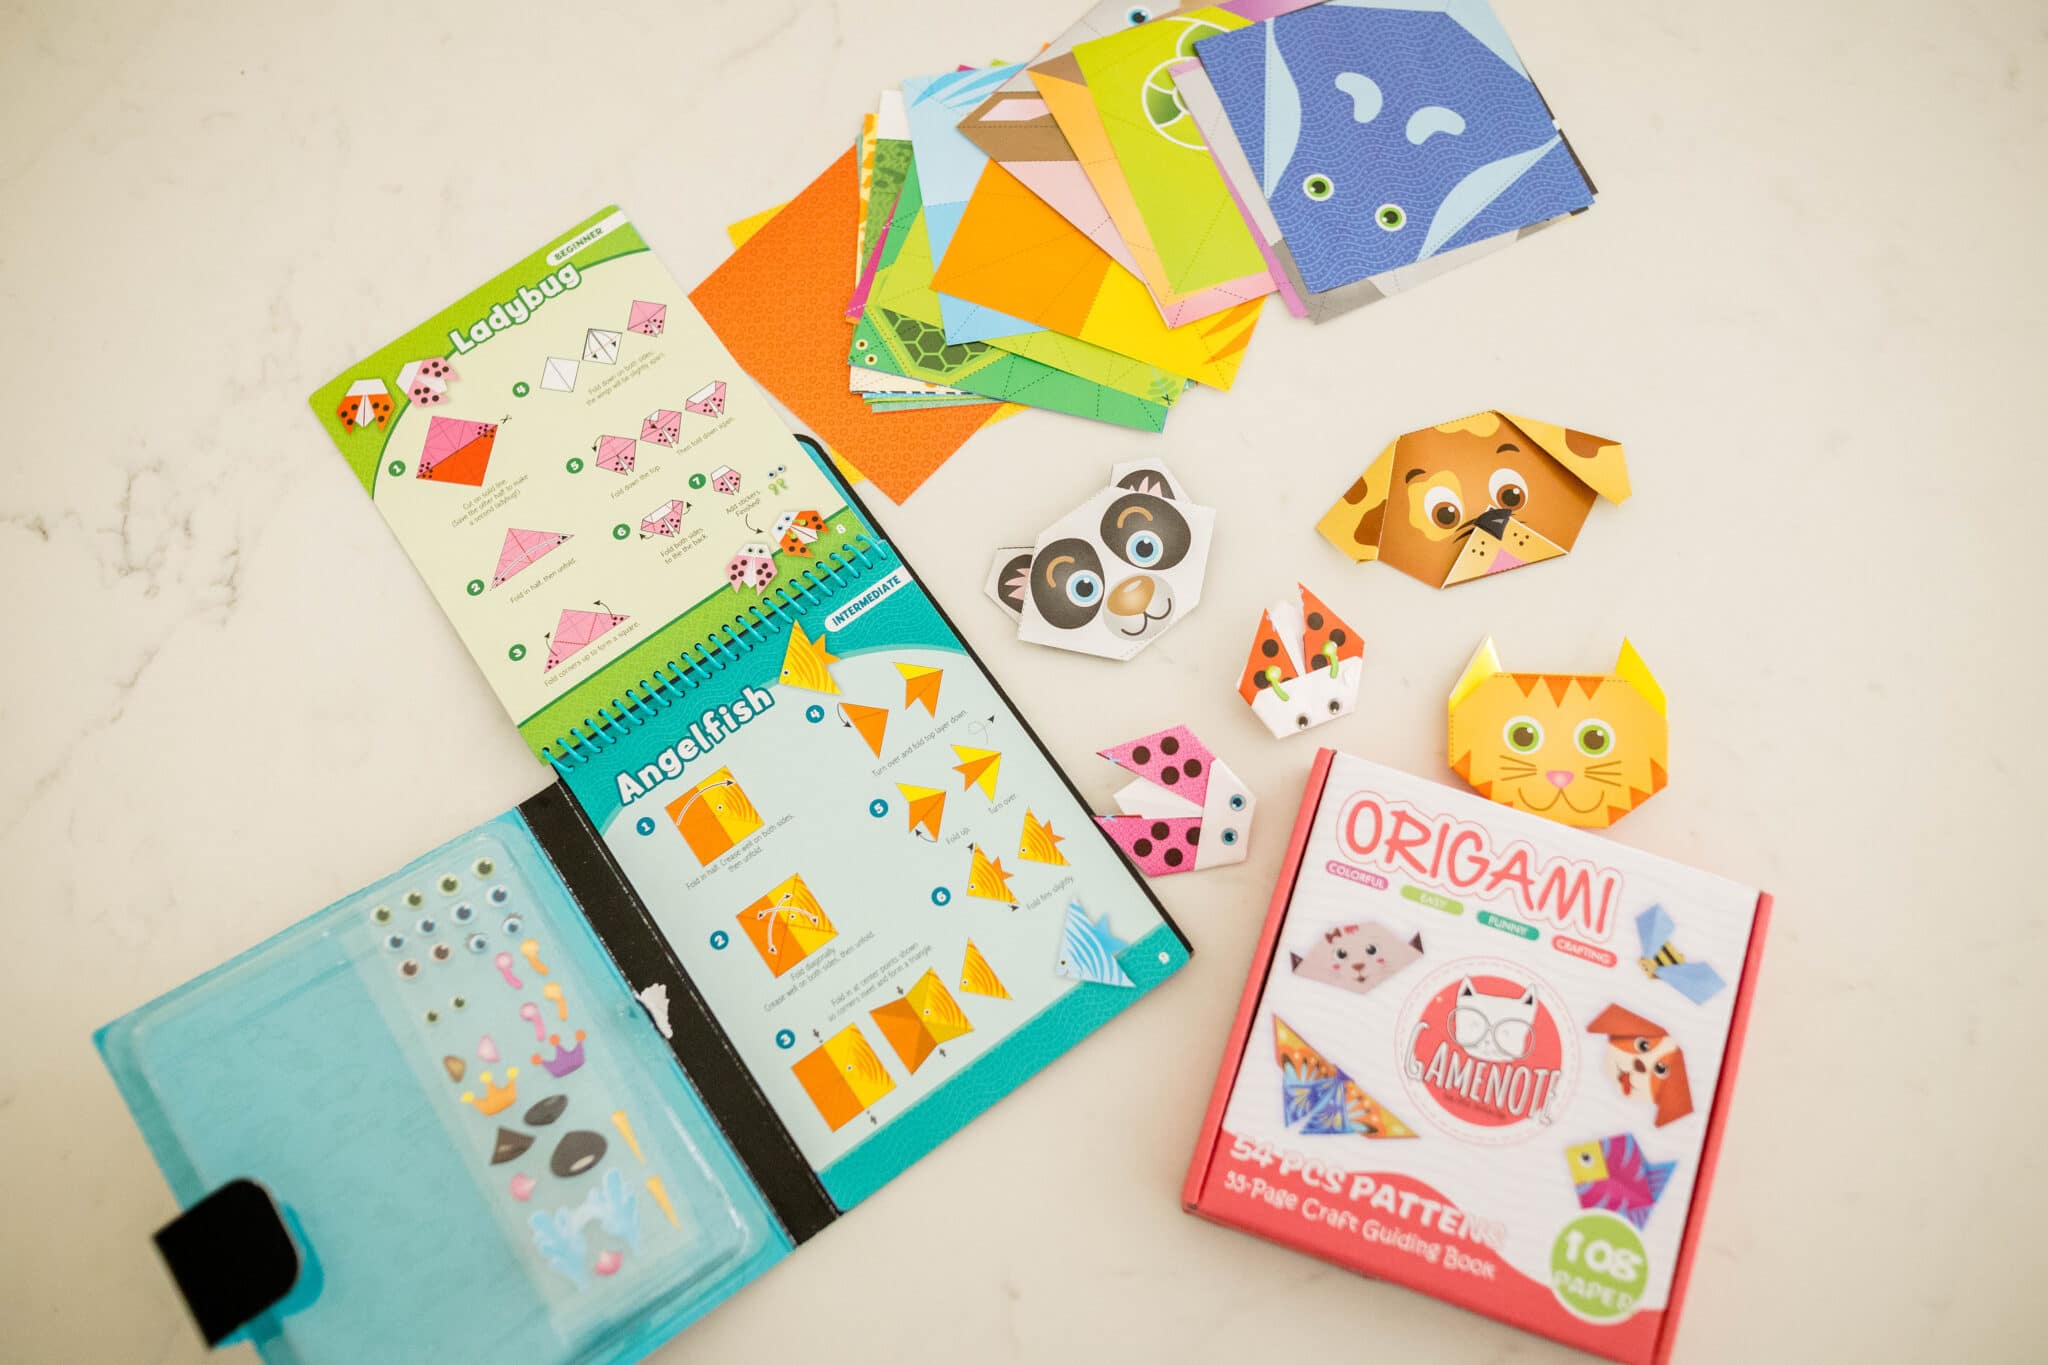 Our Favorite Origami Kits for Kids